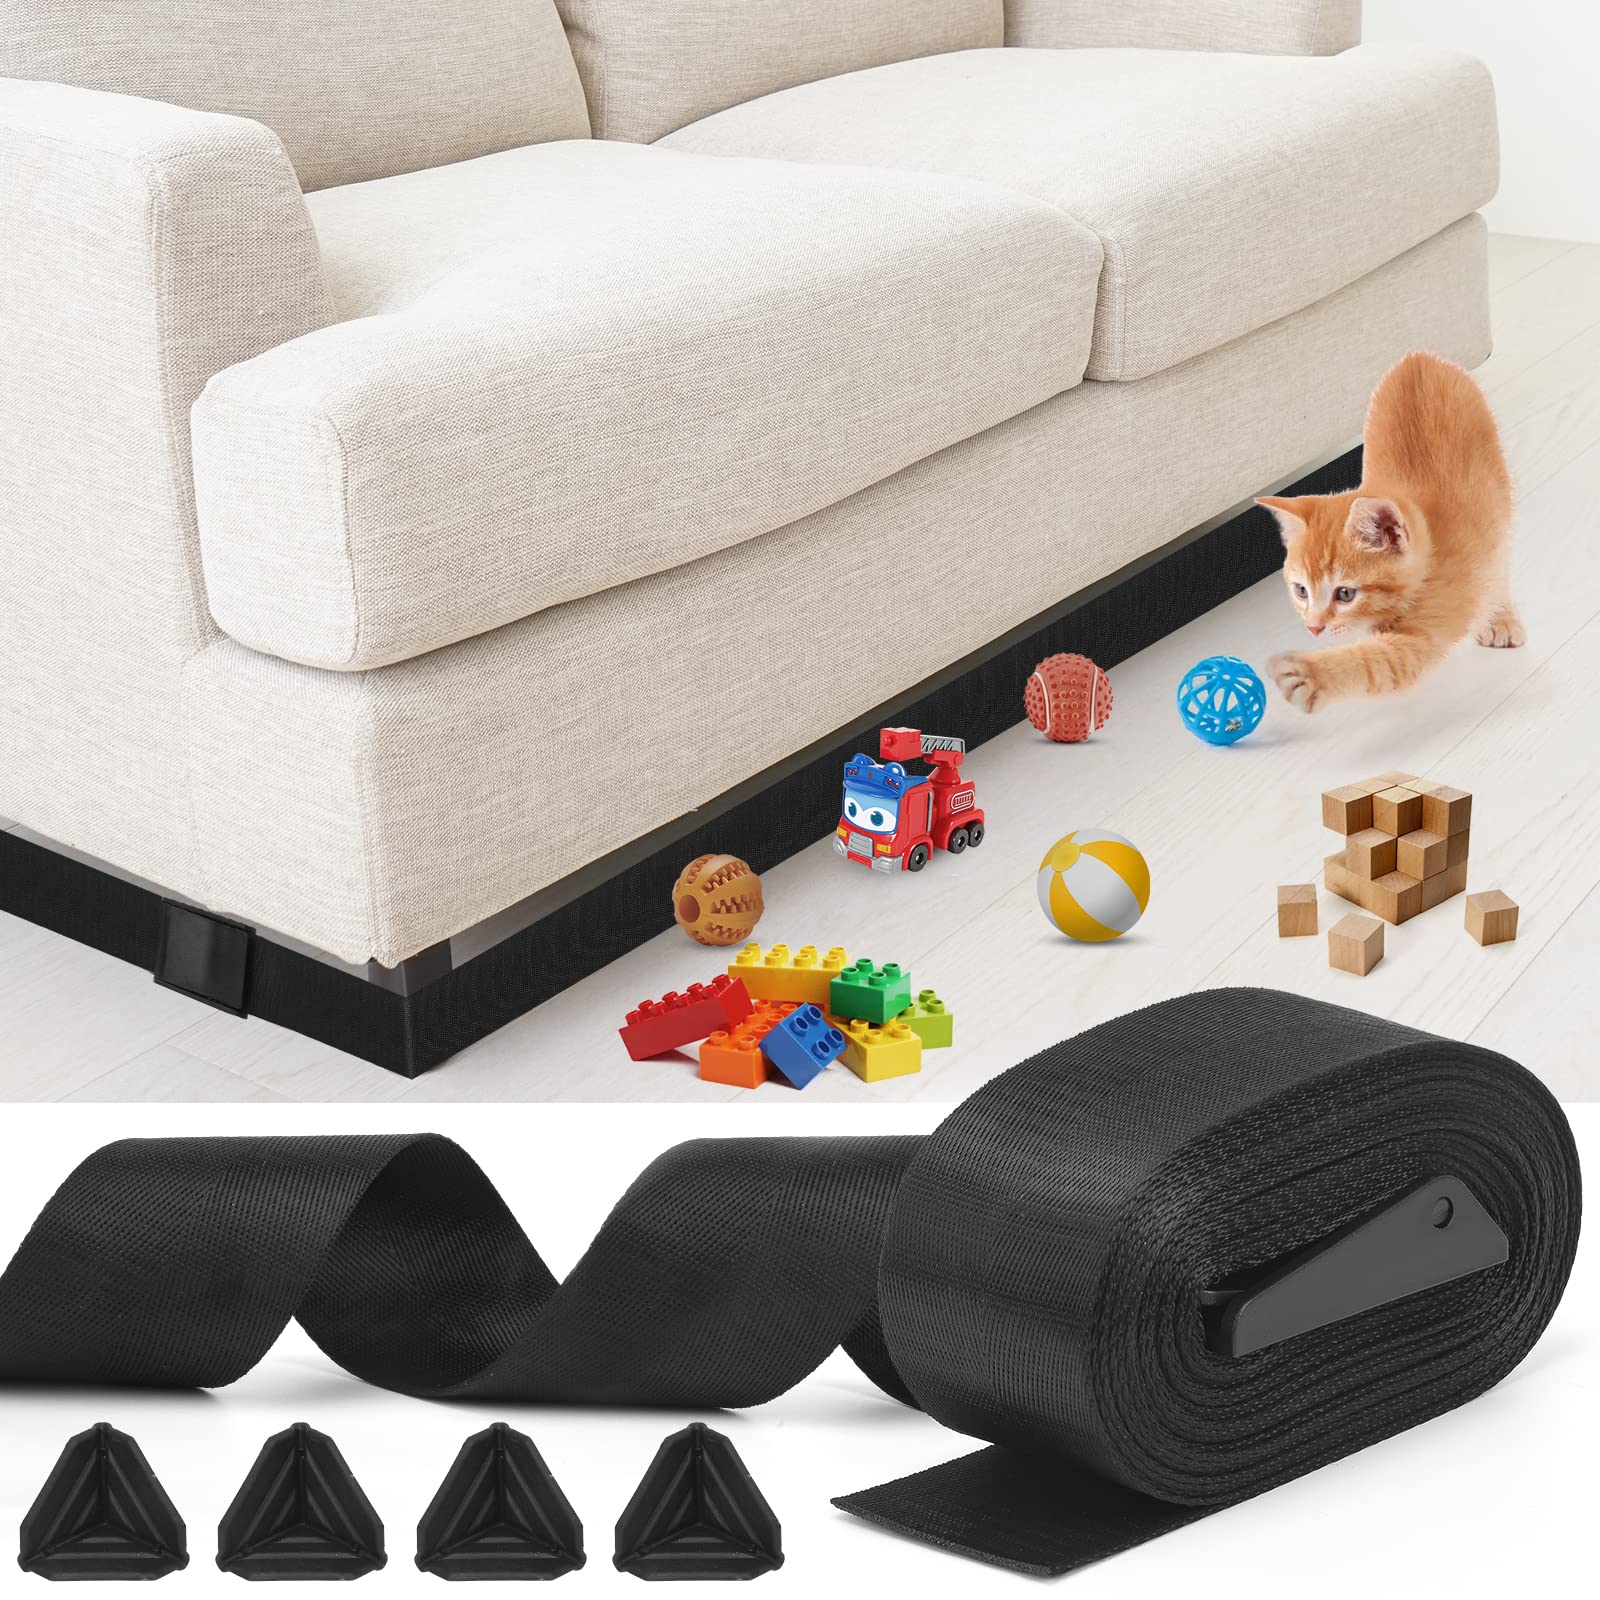 PENXUA Toy Blocker for Under couch, Under Bed Blocker for Pets,Adjustable  gap Bumper,Stop Things Sliding Under Sofa or Furniture,compat